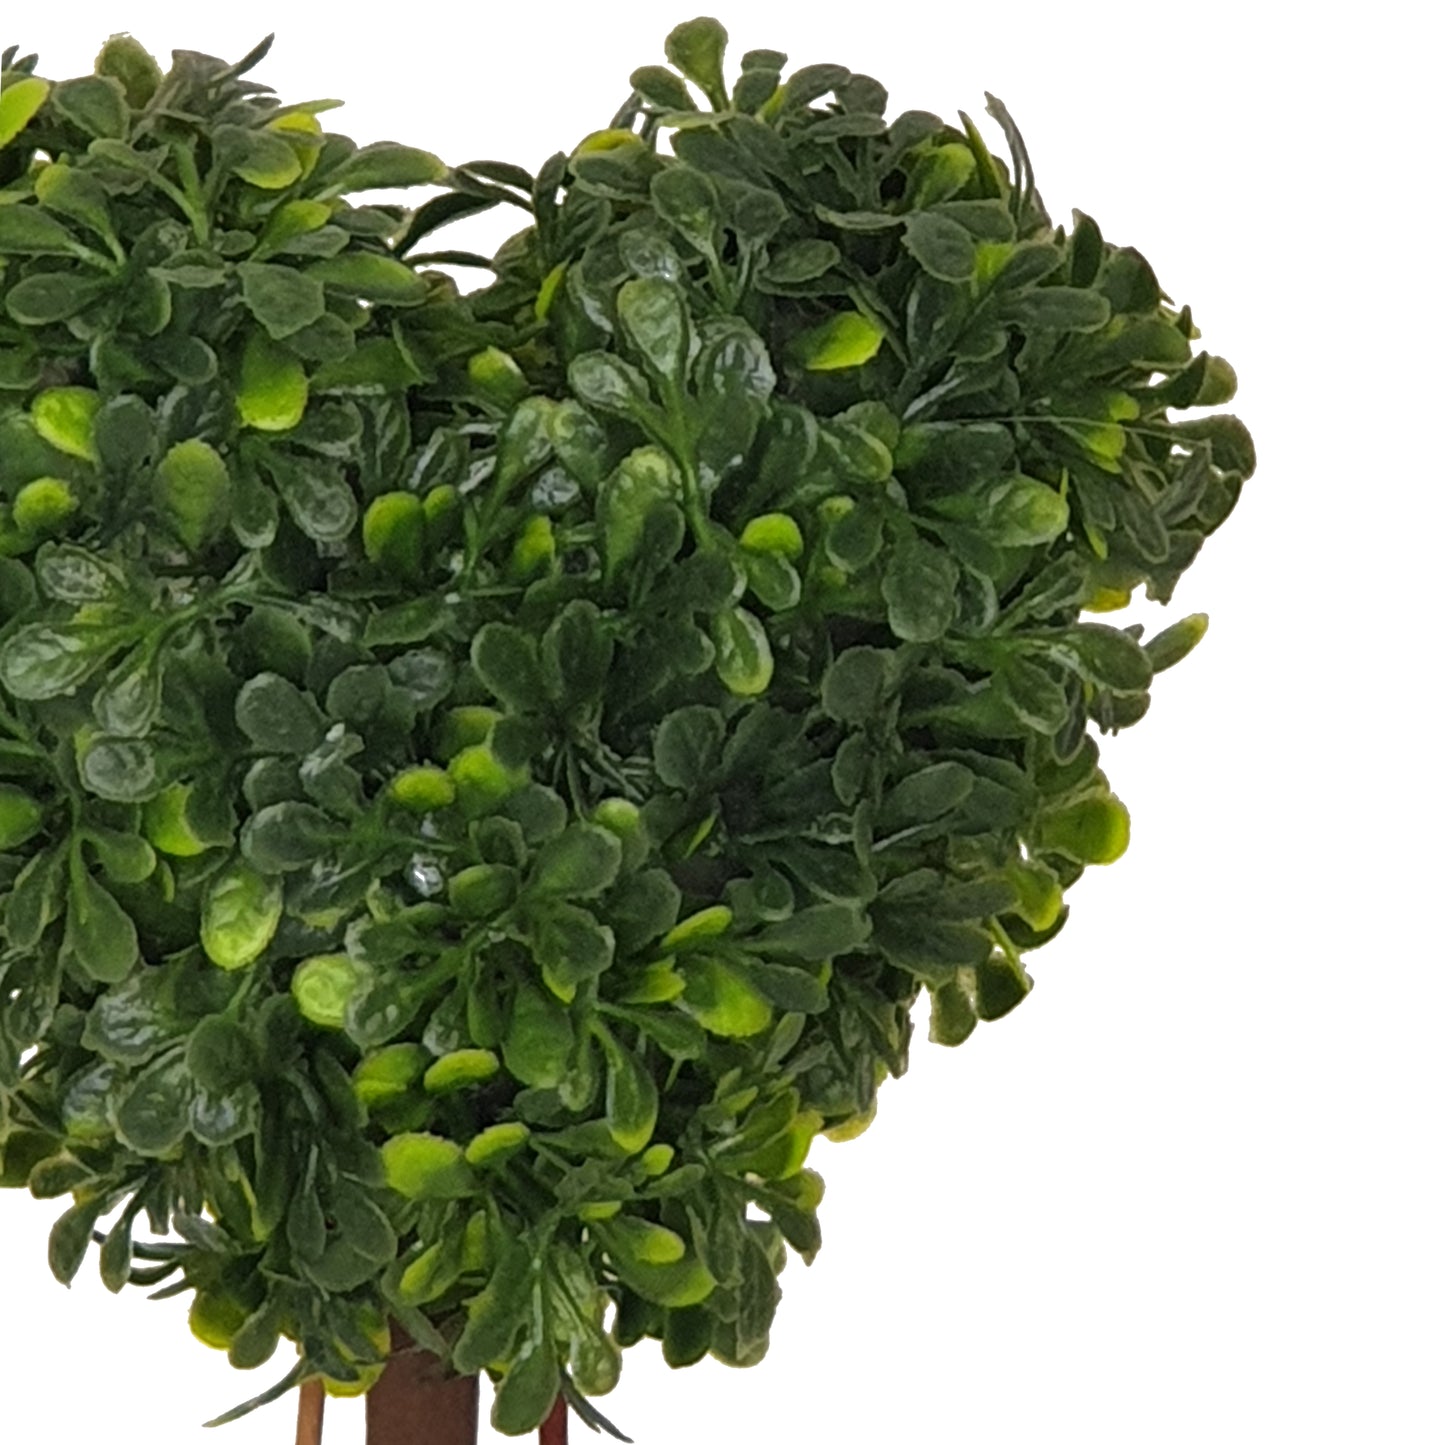 Criterion Artificial Topiary Heart 210mm